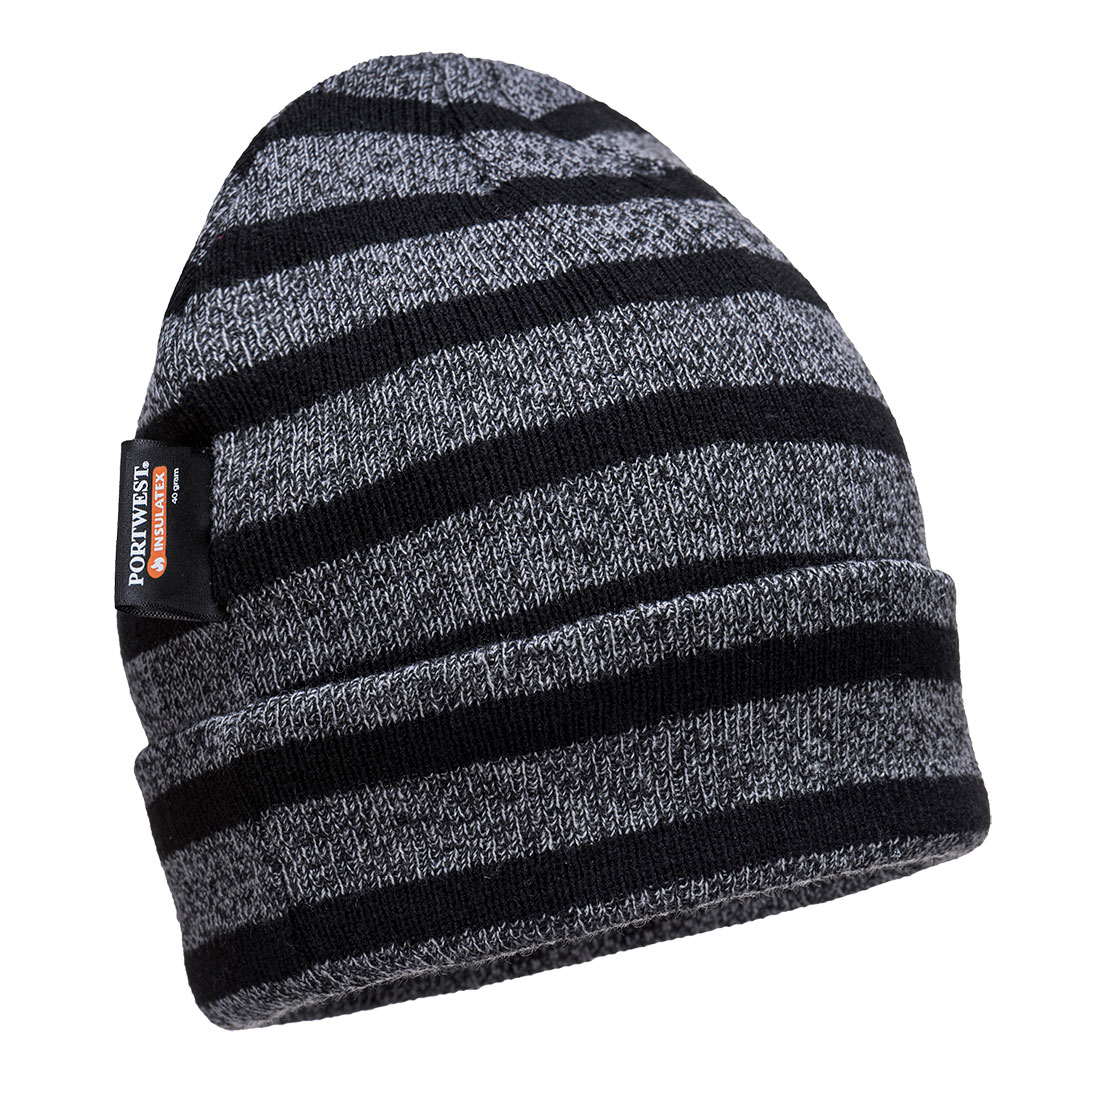 Striped Insulated Knit Cap, Insulatex Lined Size  Grey/Black